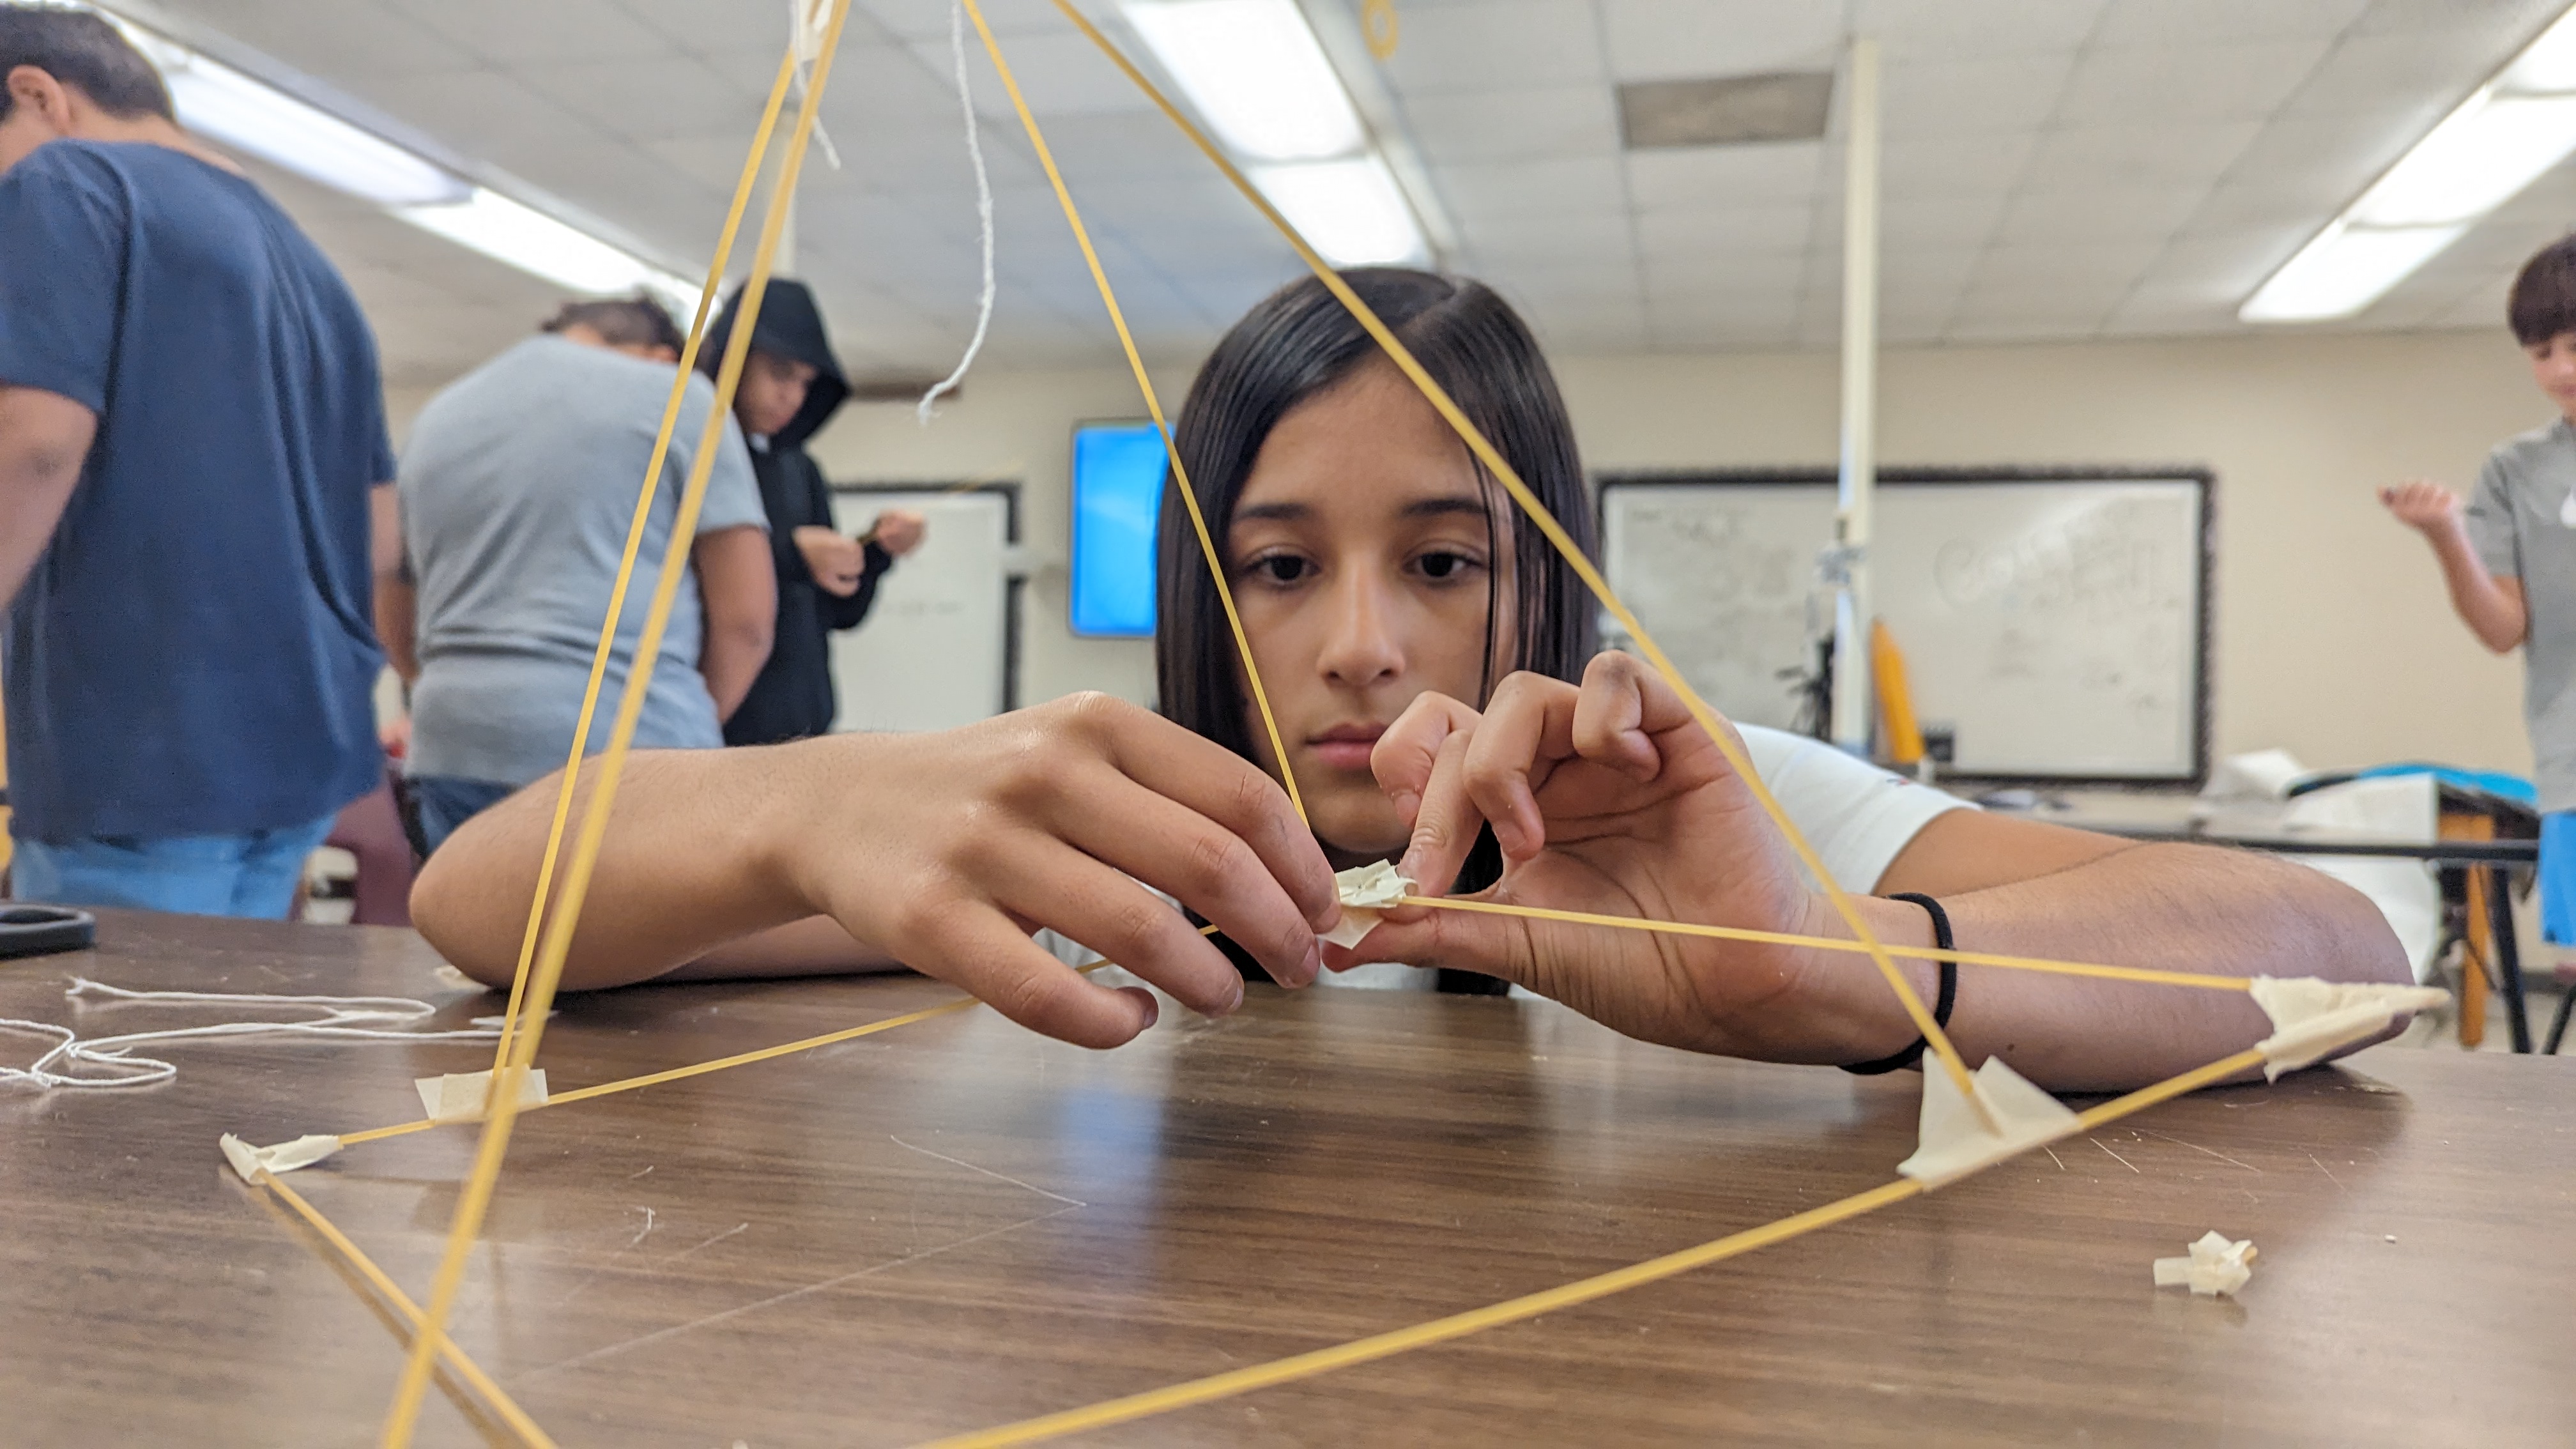 7th grader working on her marshmallow tower